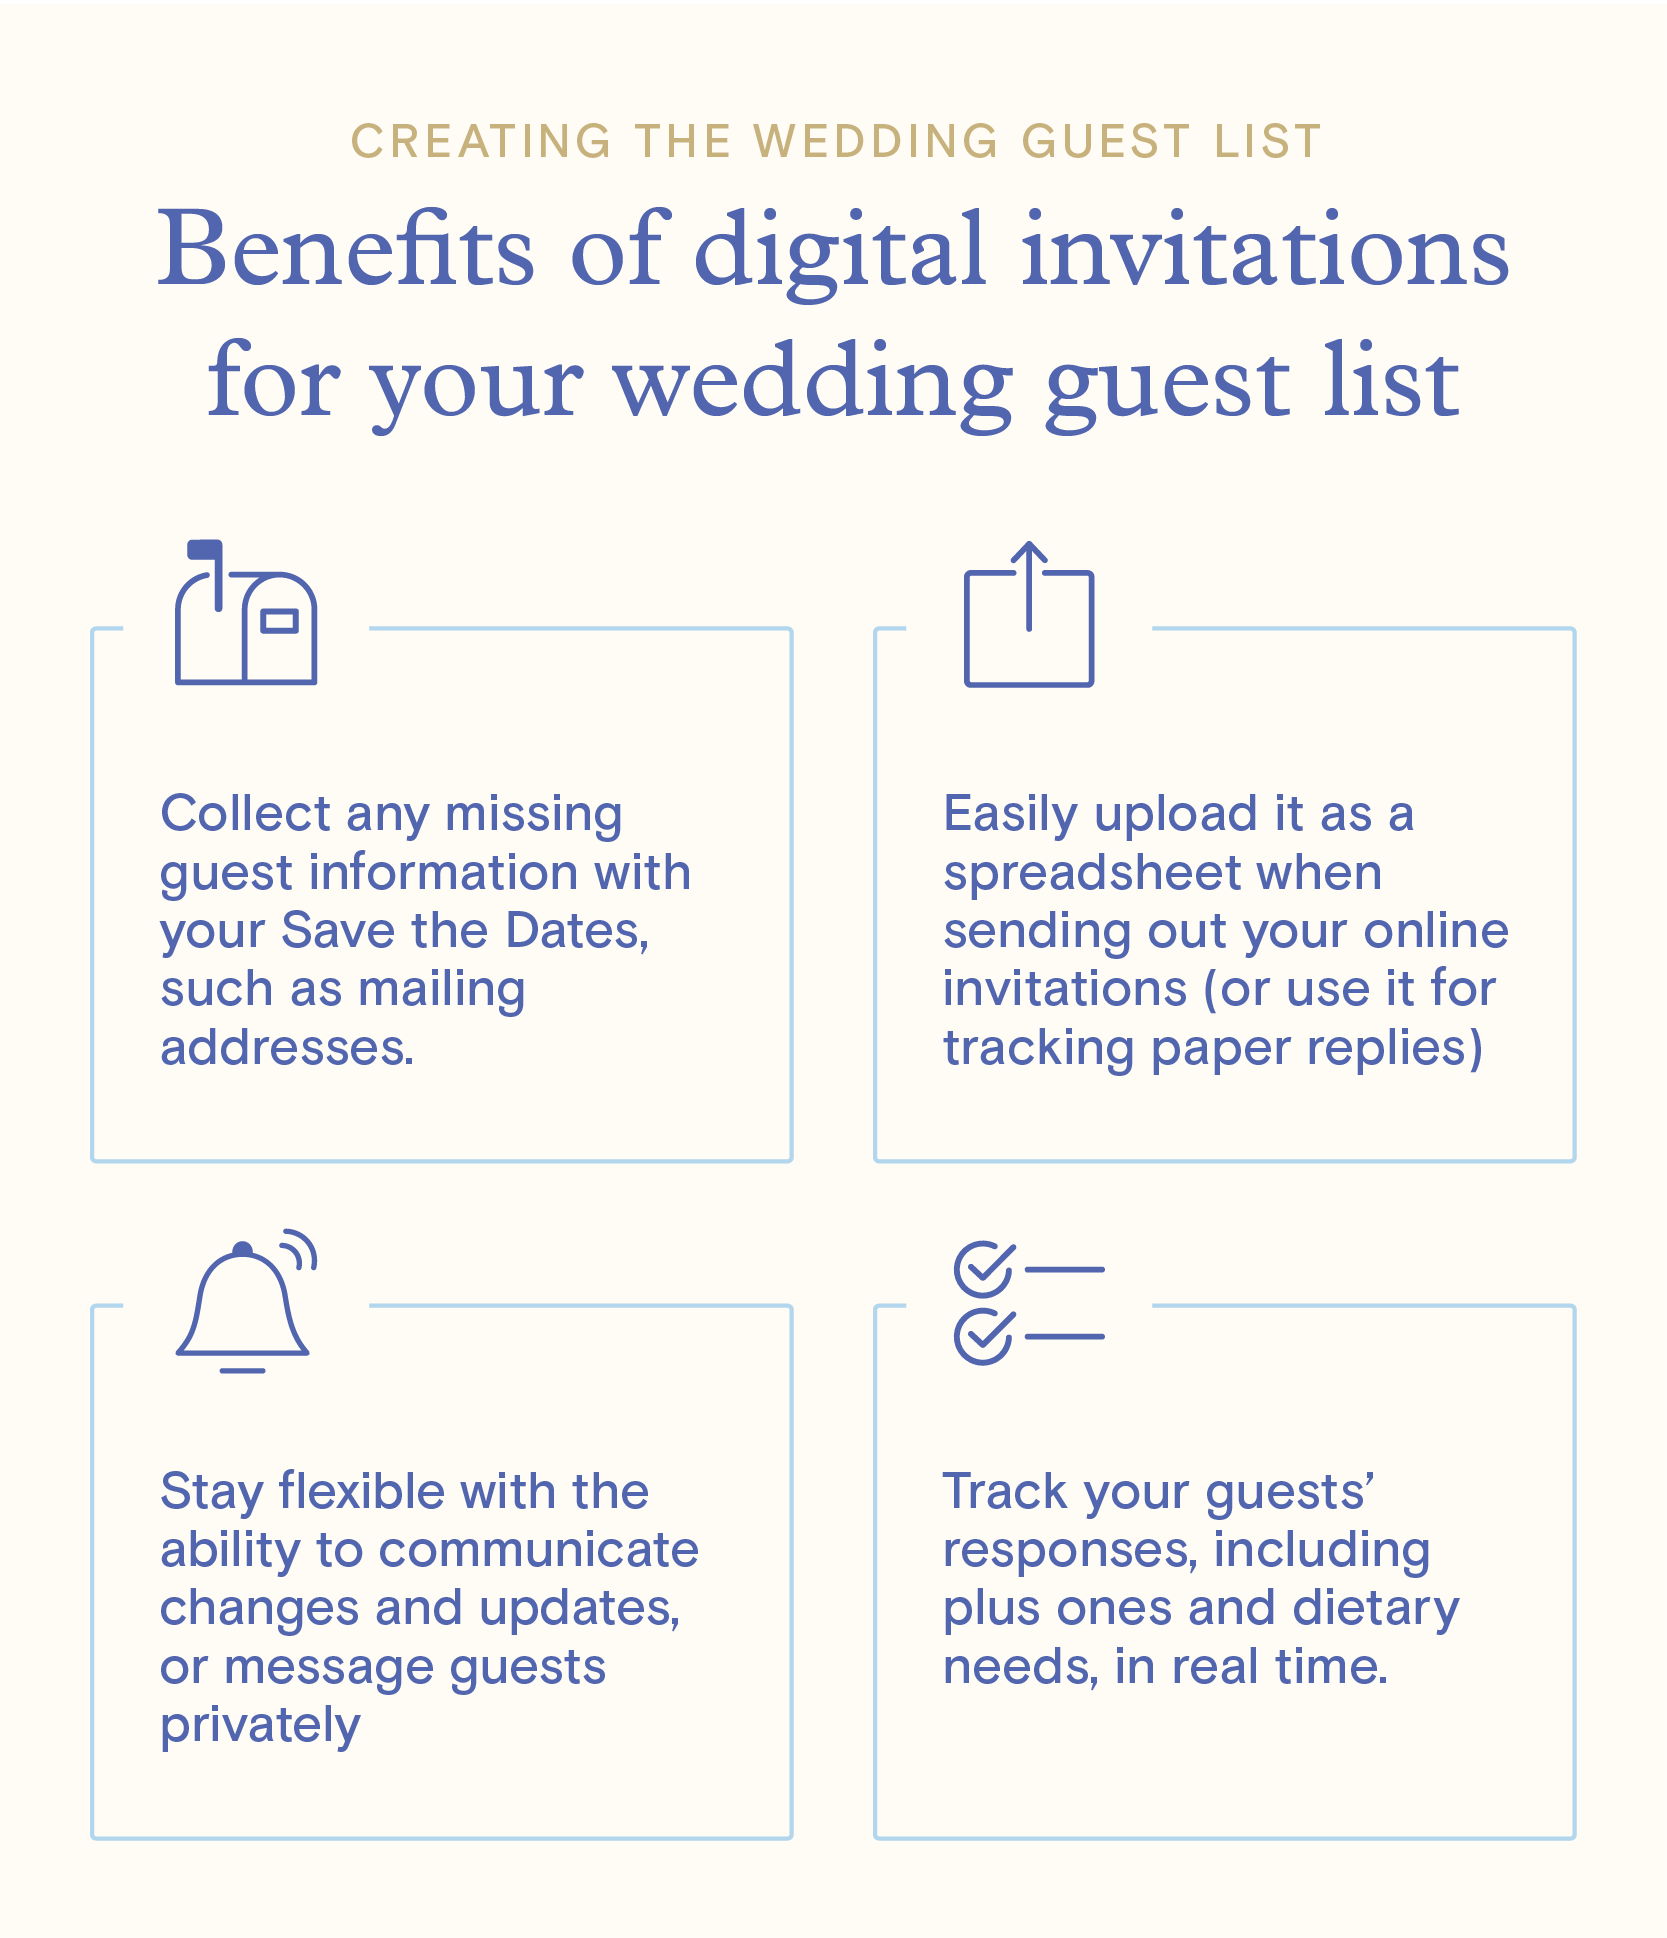 An infographic explaining the benefits of using digital invitations like tracking guests’ responses and the flexibility to communicate if plans change.